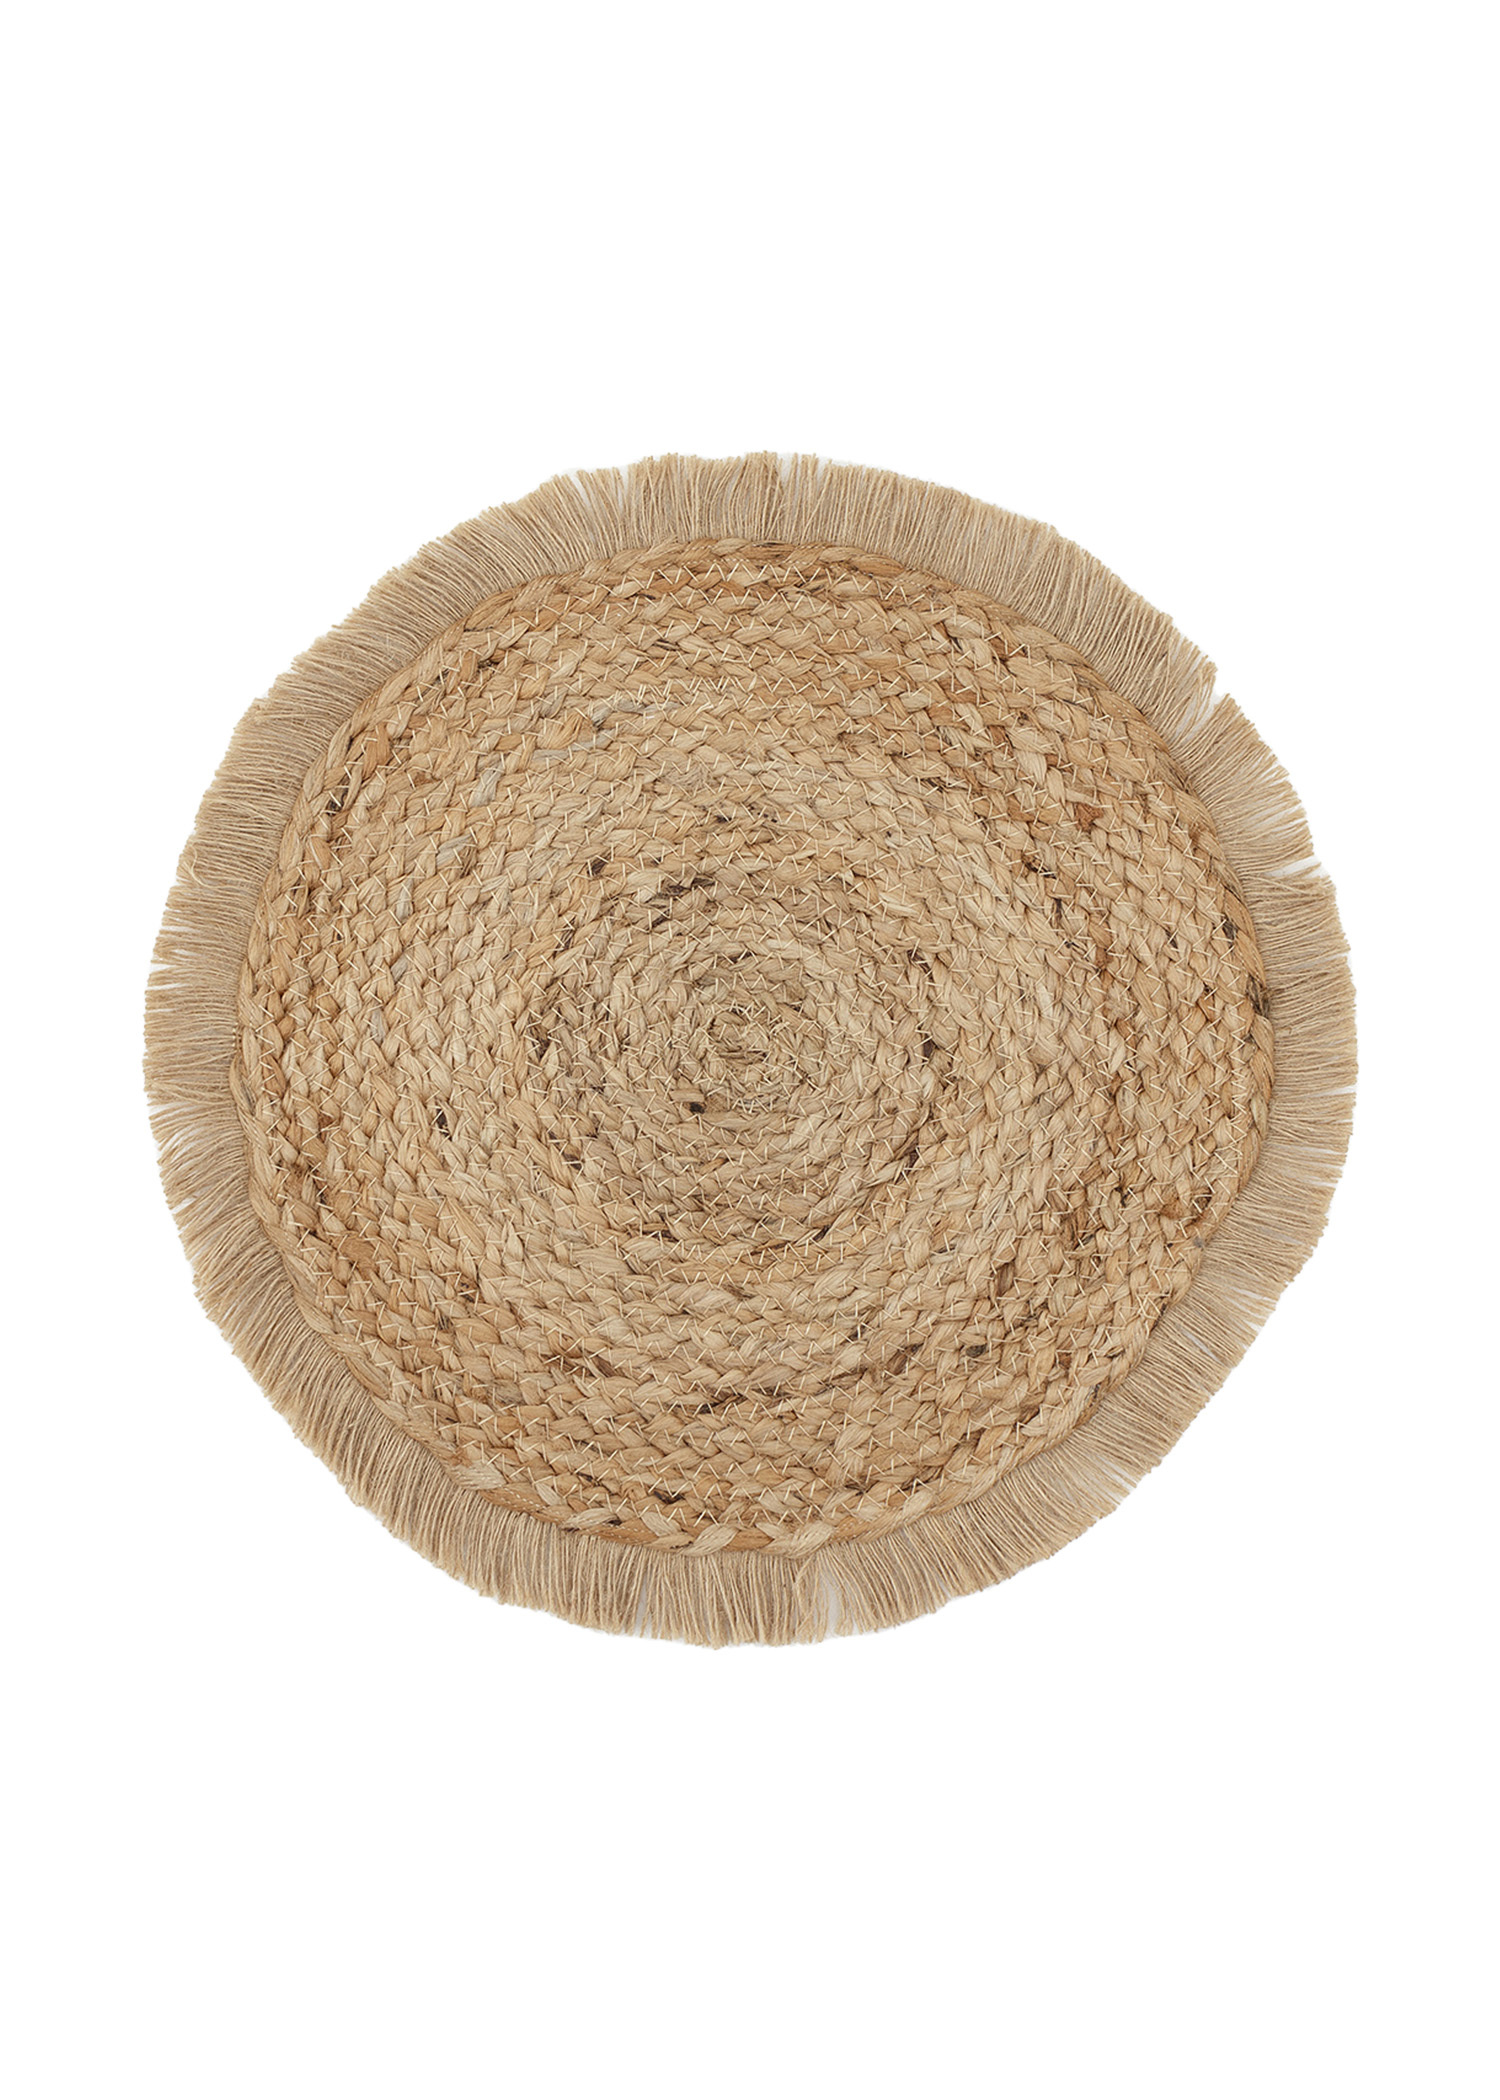 Jute placemat with fringes Image 0